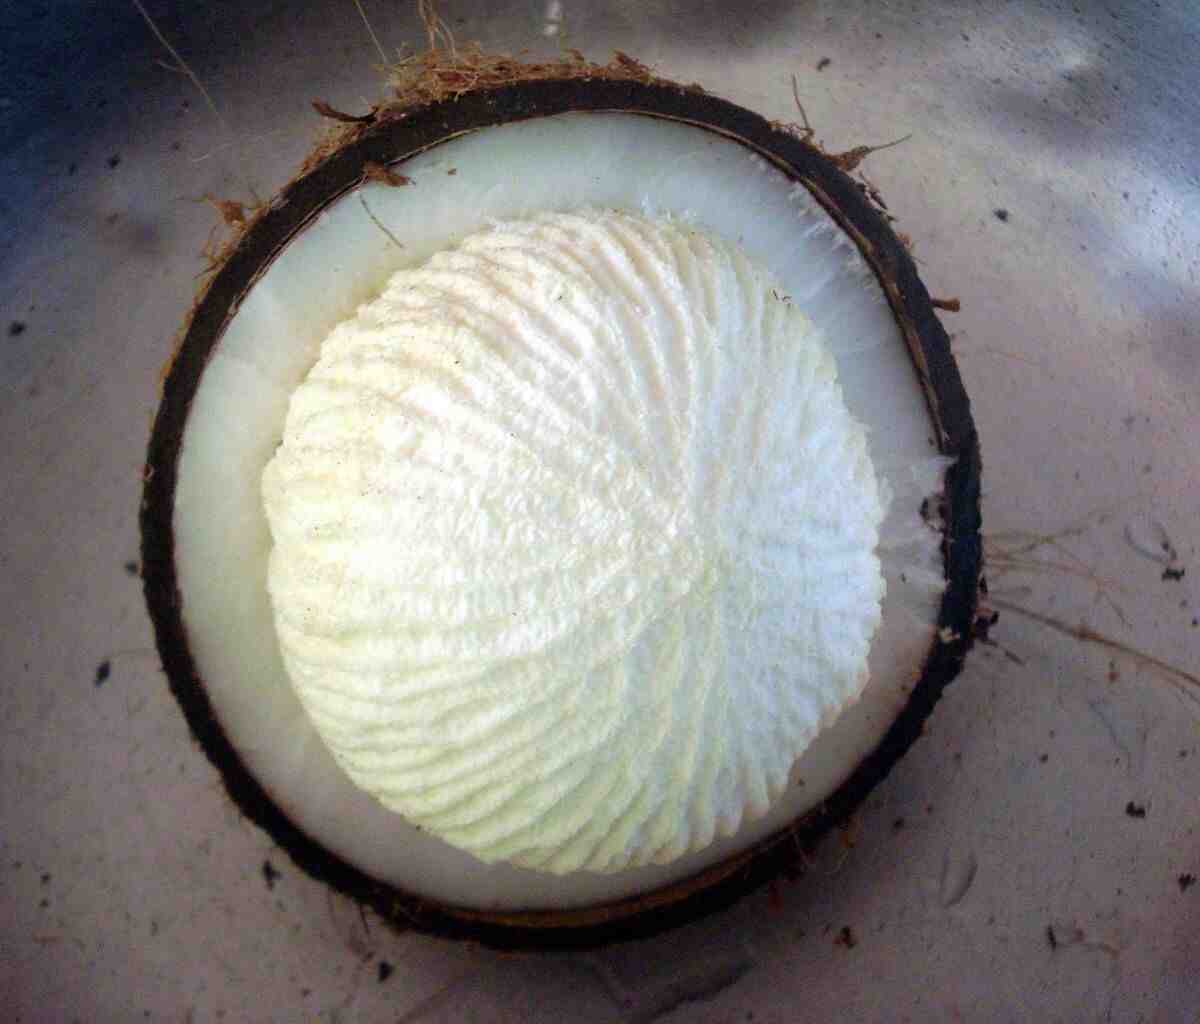 What is inside a coconut?